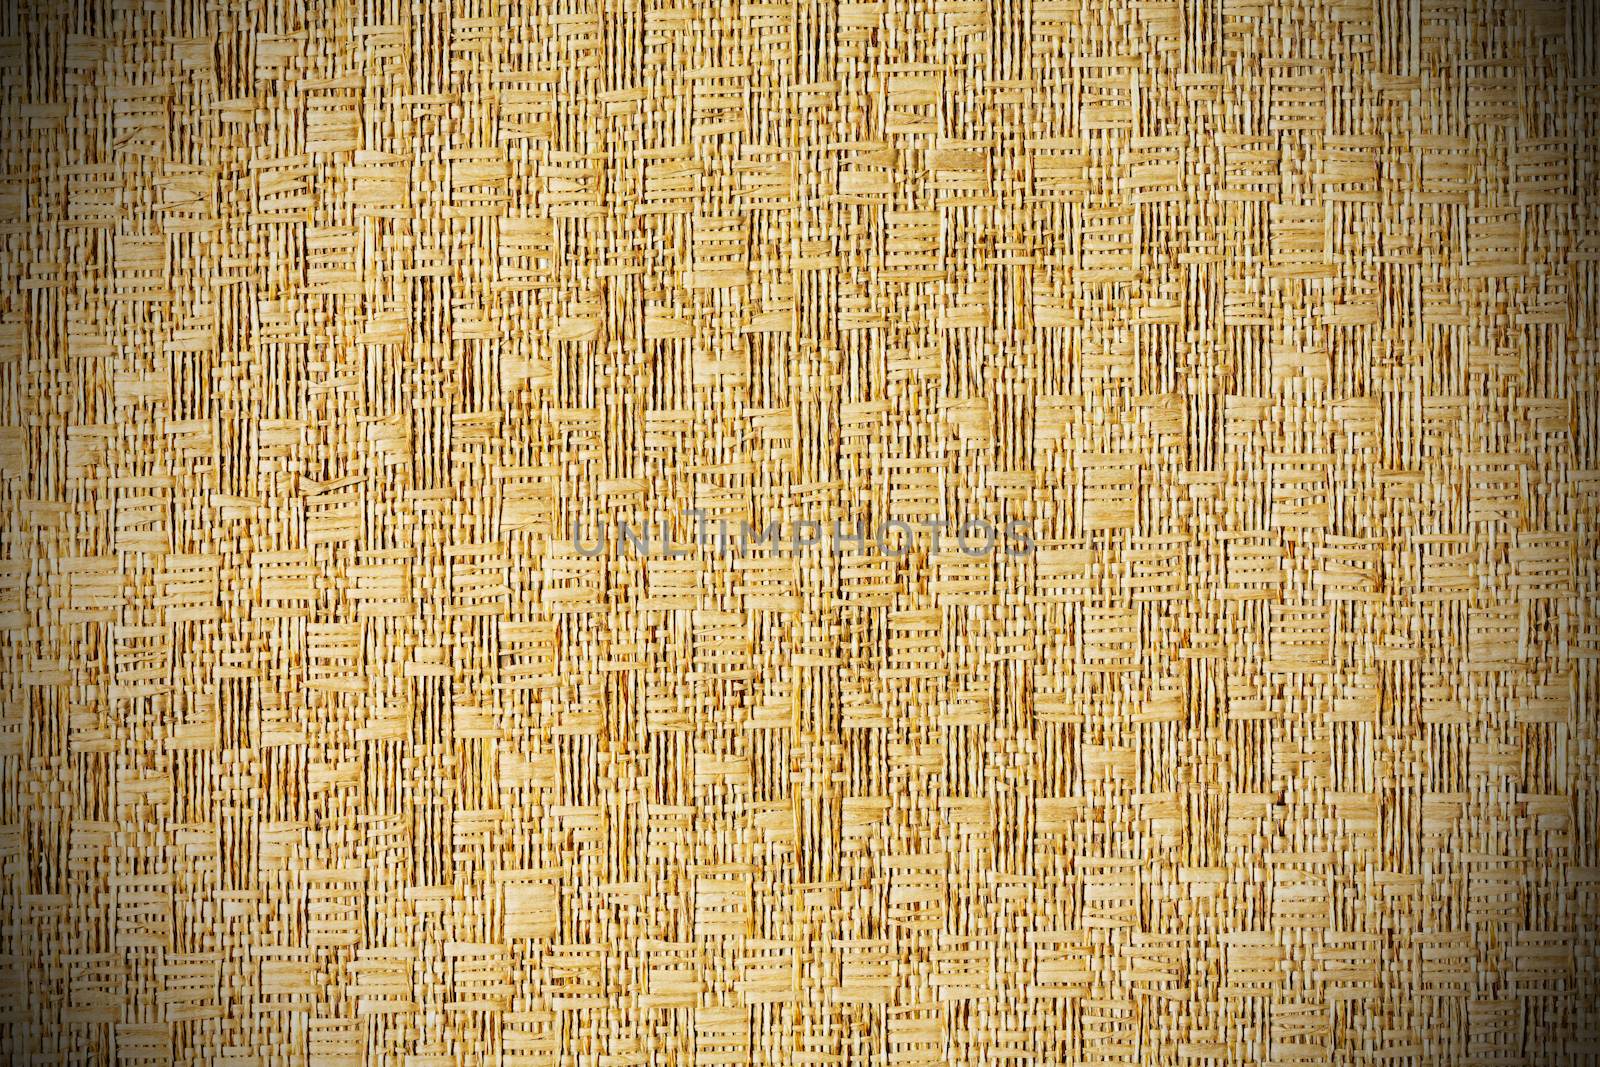 Straw mat by smuay